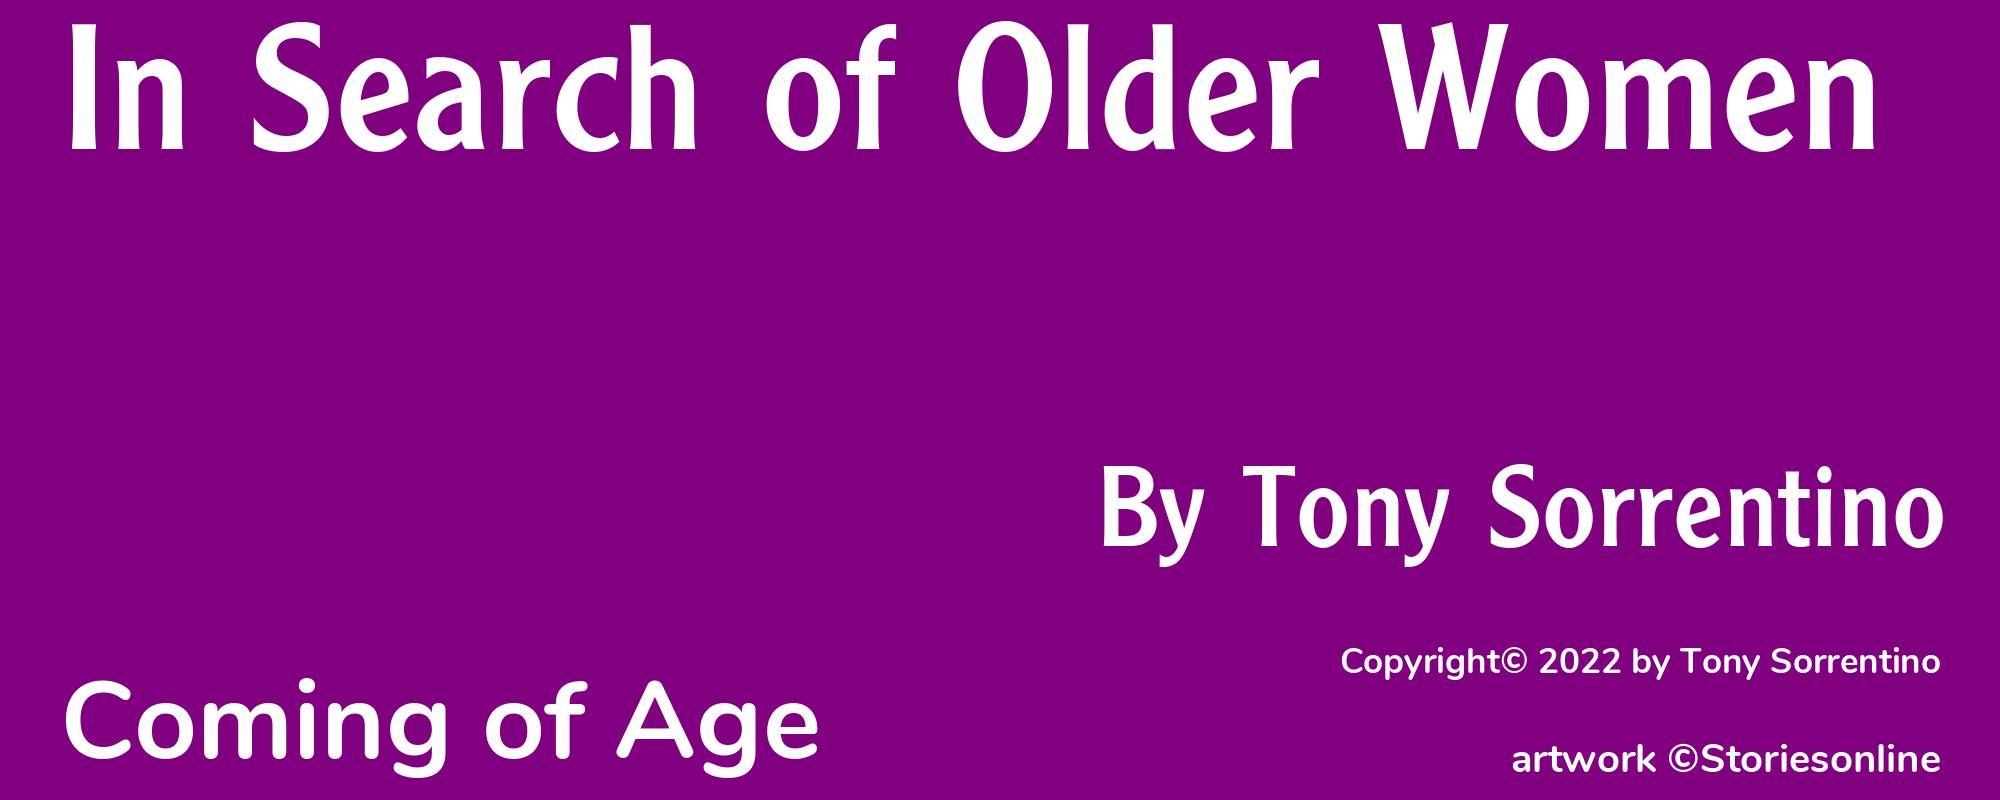 In Search of Older Women - Cover